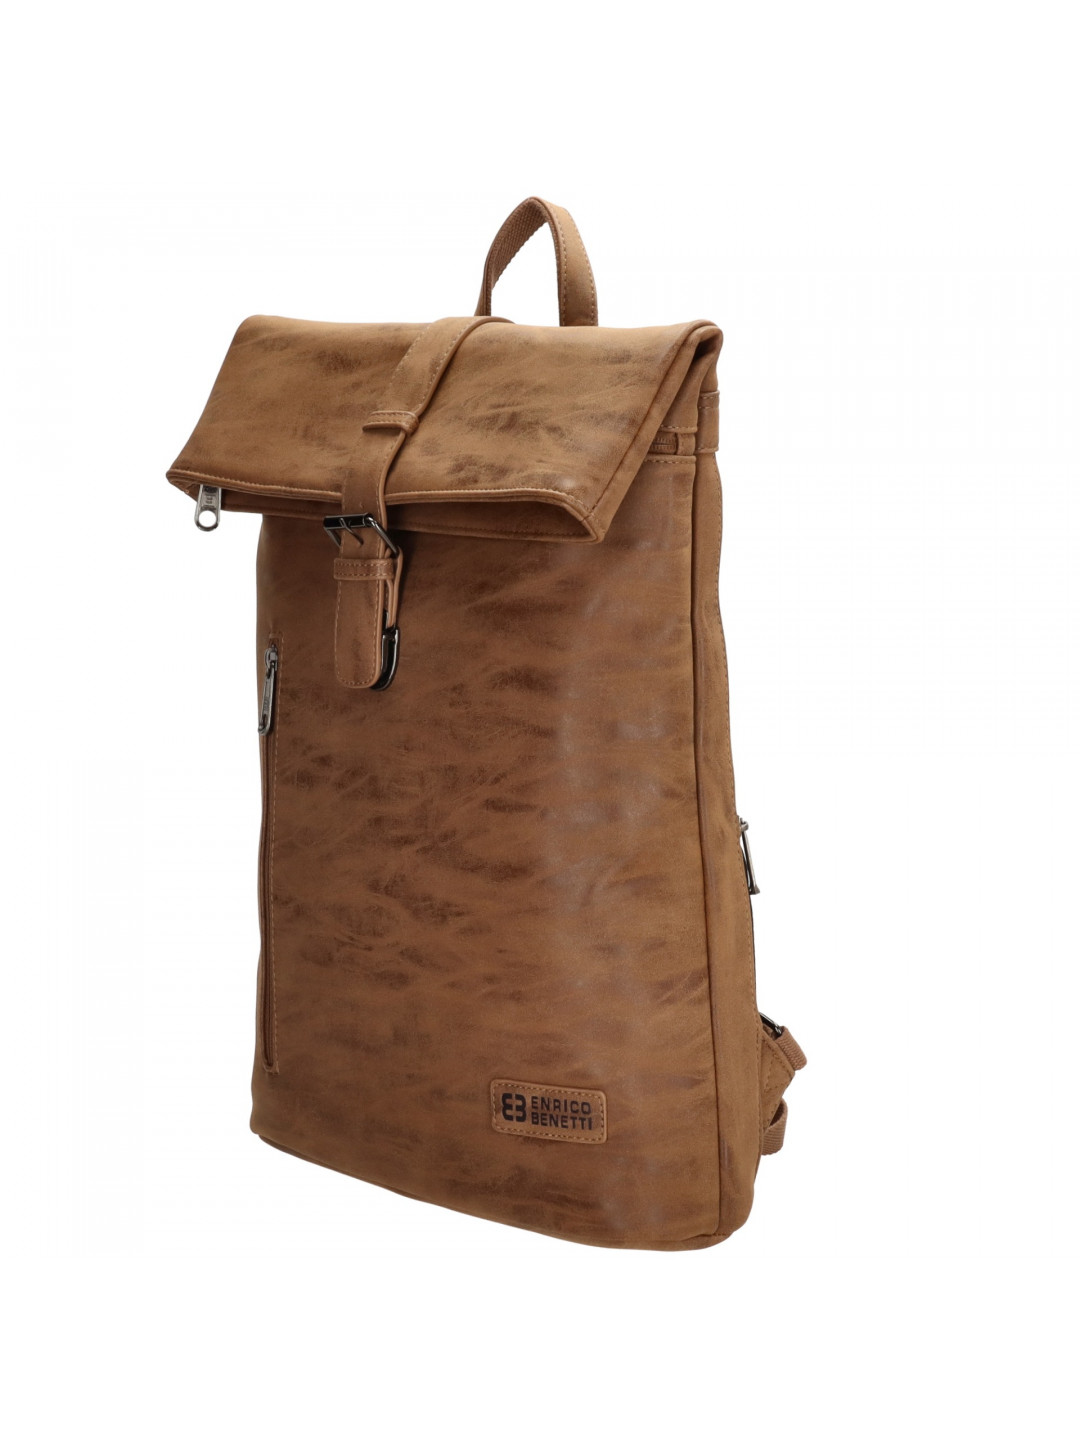 Enrico Benetti Rotterdam 15 quot Notebook Backpack 15 l Camel